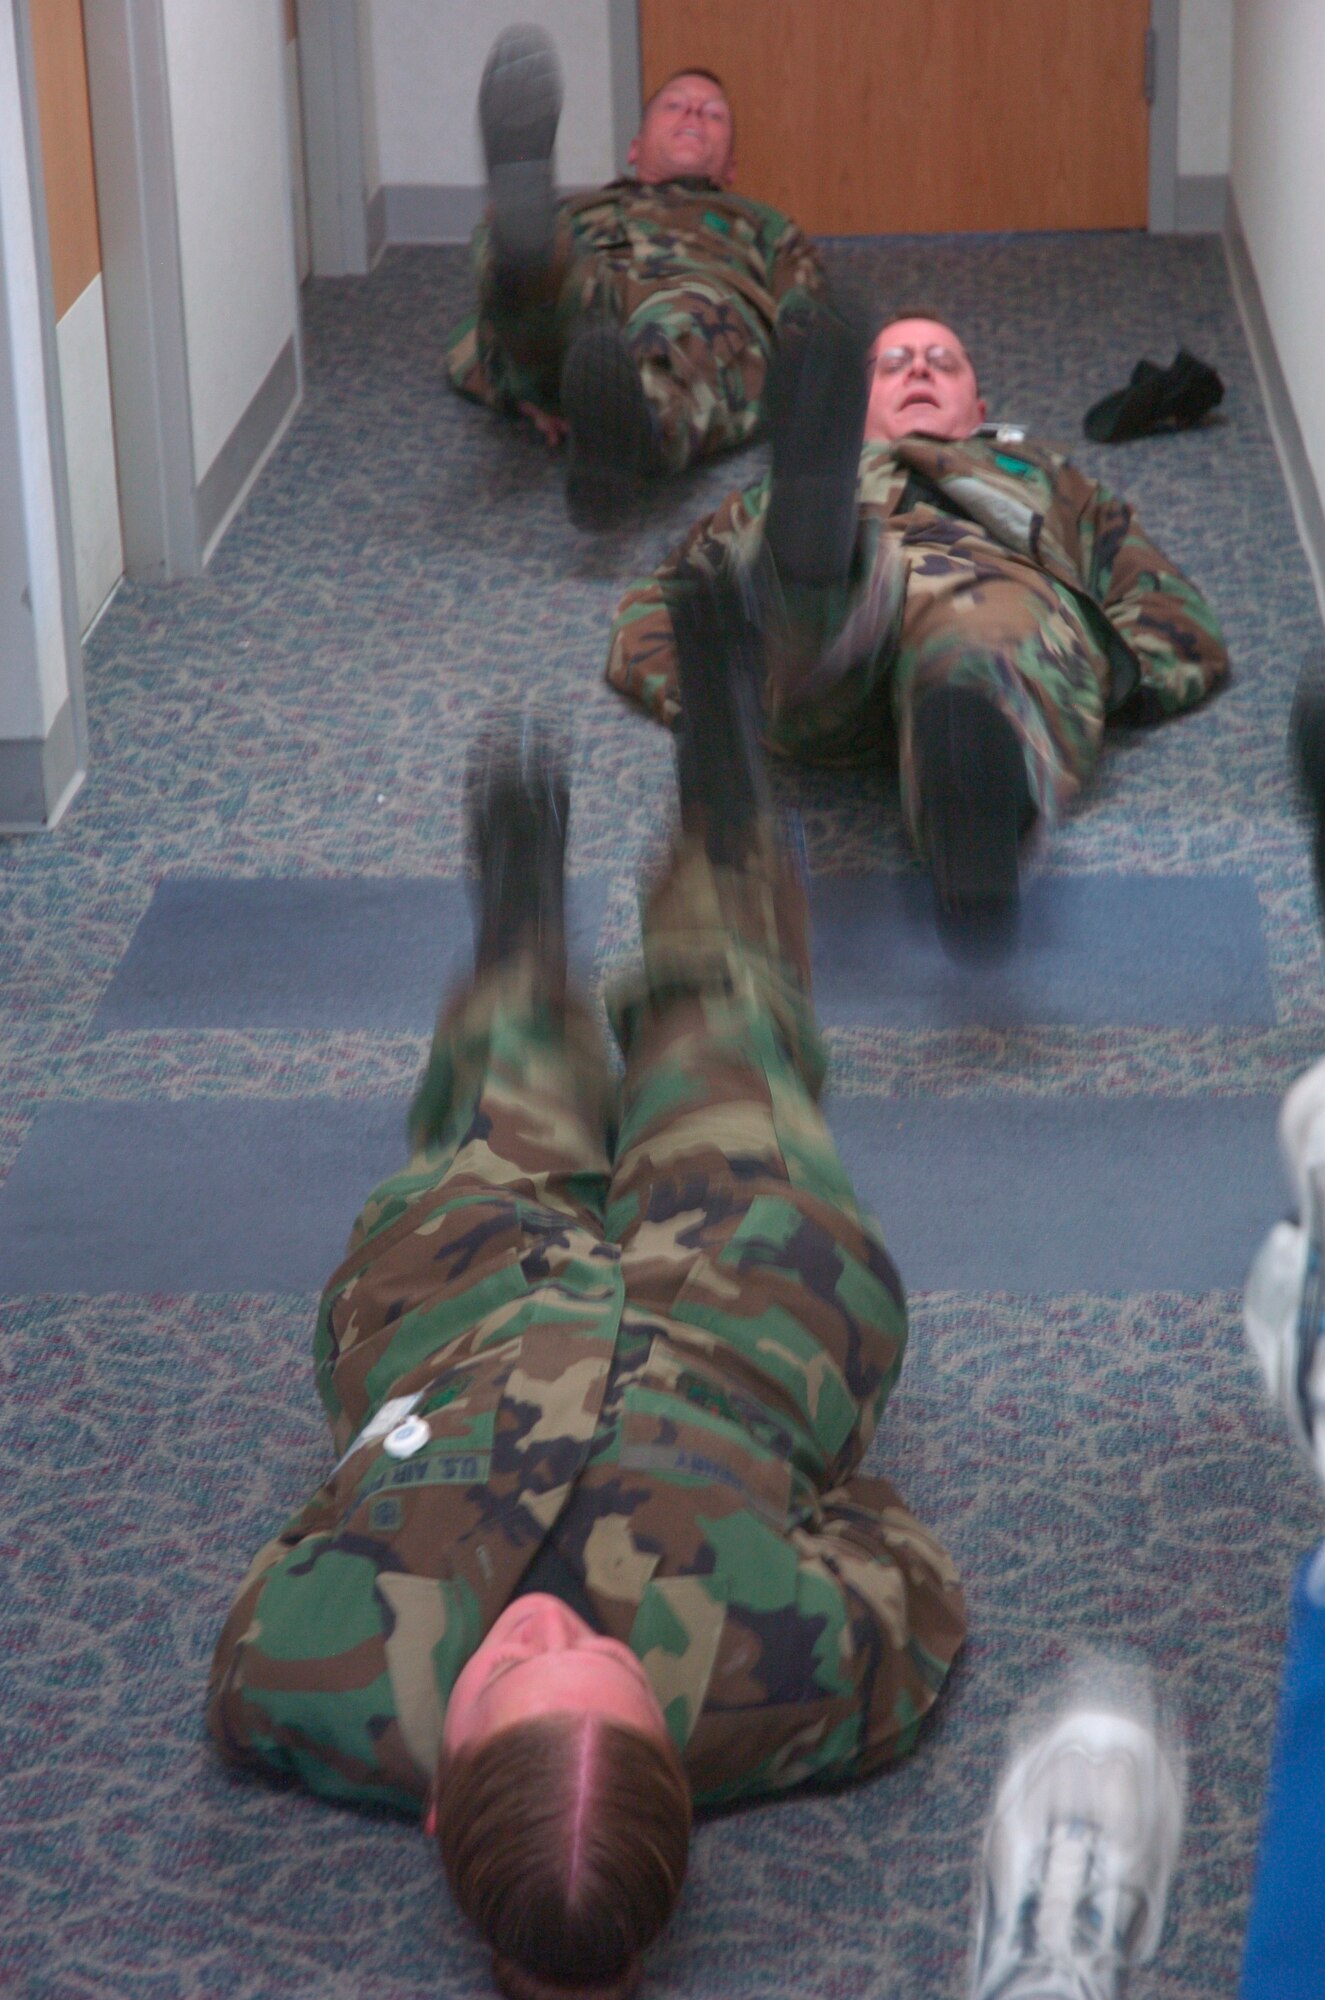 Chief Master Sgt. William Gurney, Ogden Air Logistics Center and 75th Air Base Wing command chief, executes leg lifts along with members from the 75th Medical Group during one of their routine exercise sessions.